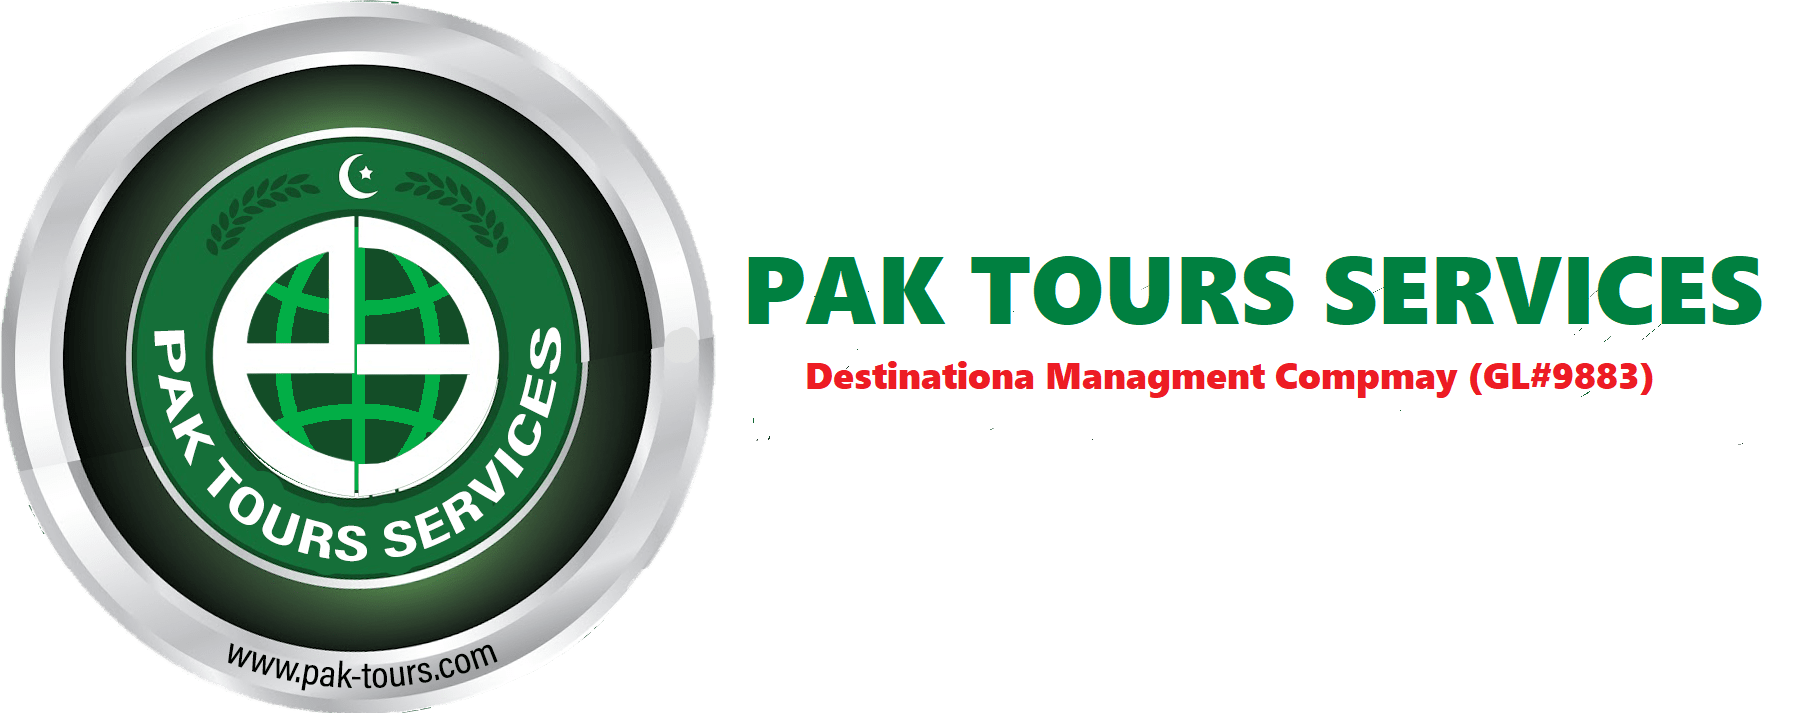 Your Trusted Travel Partner | Malaysia Tour Packages from Pakistan-